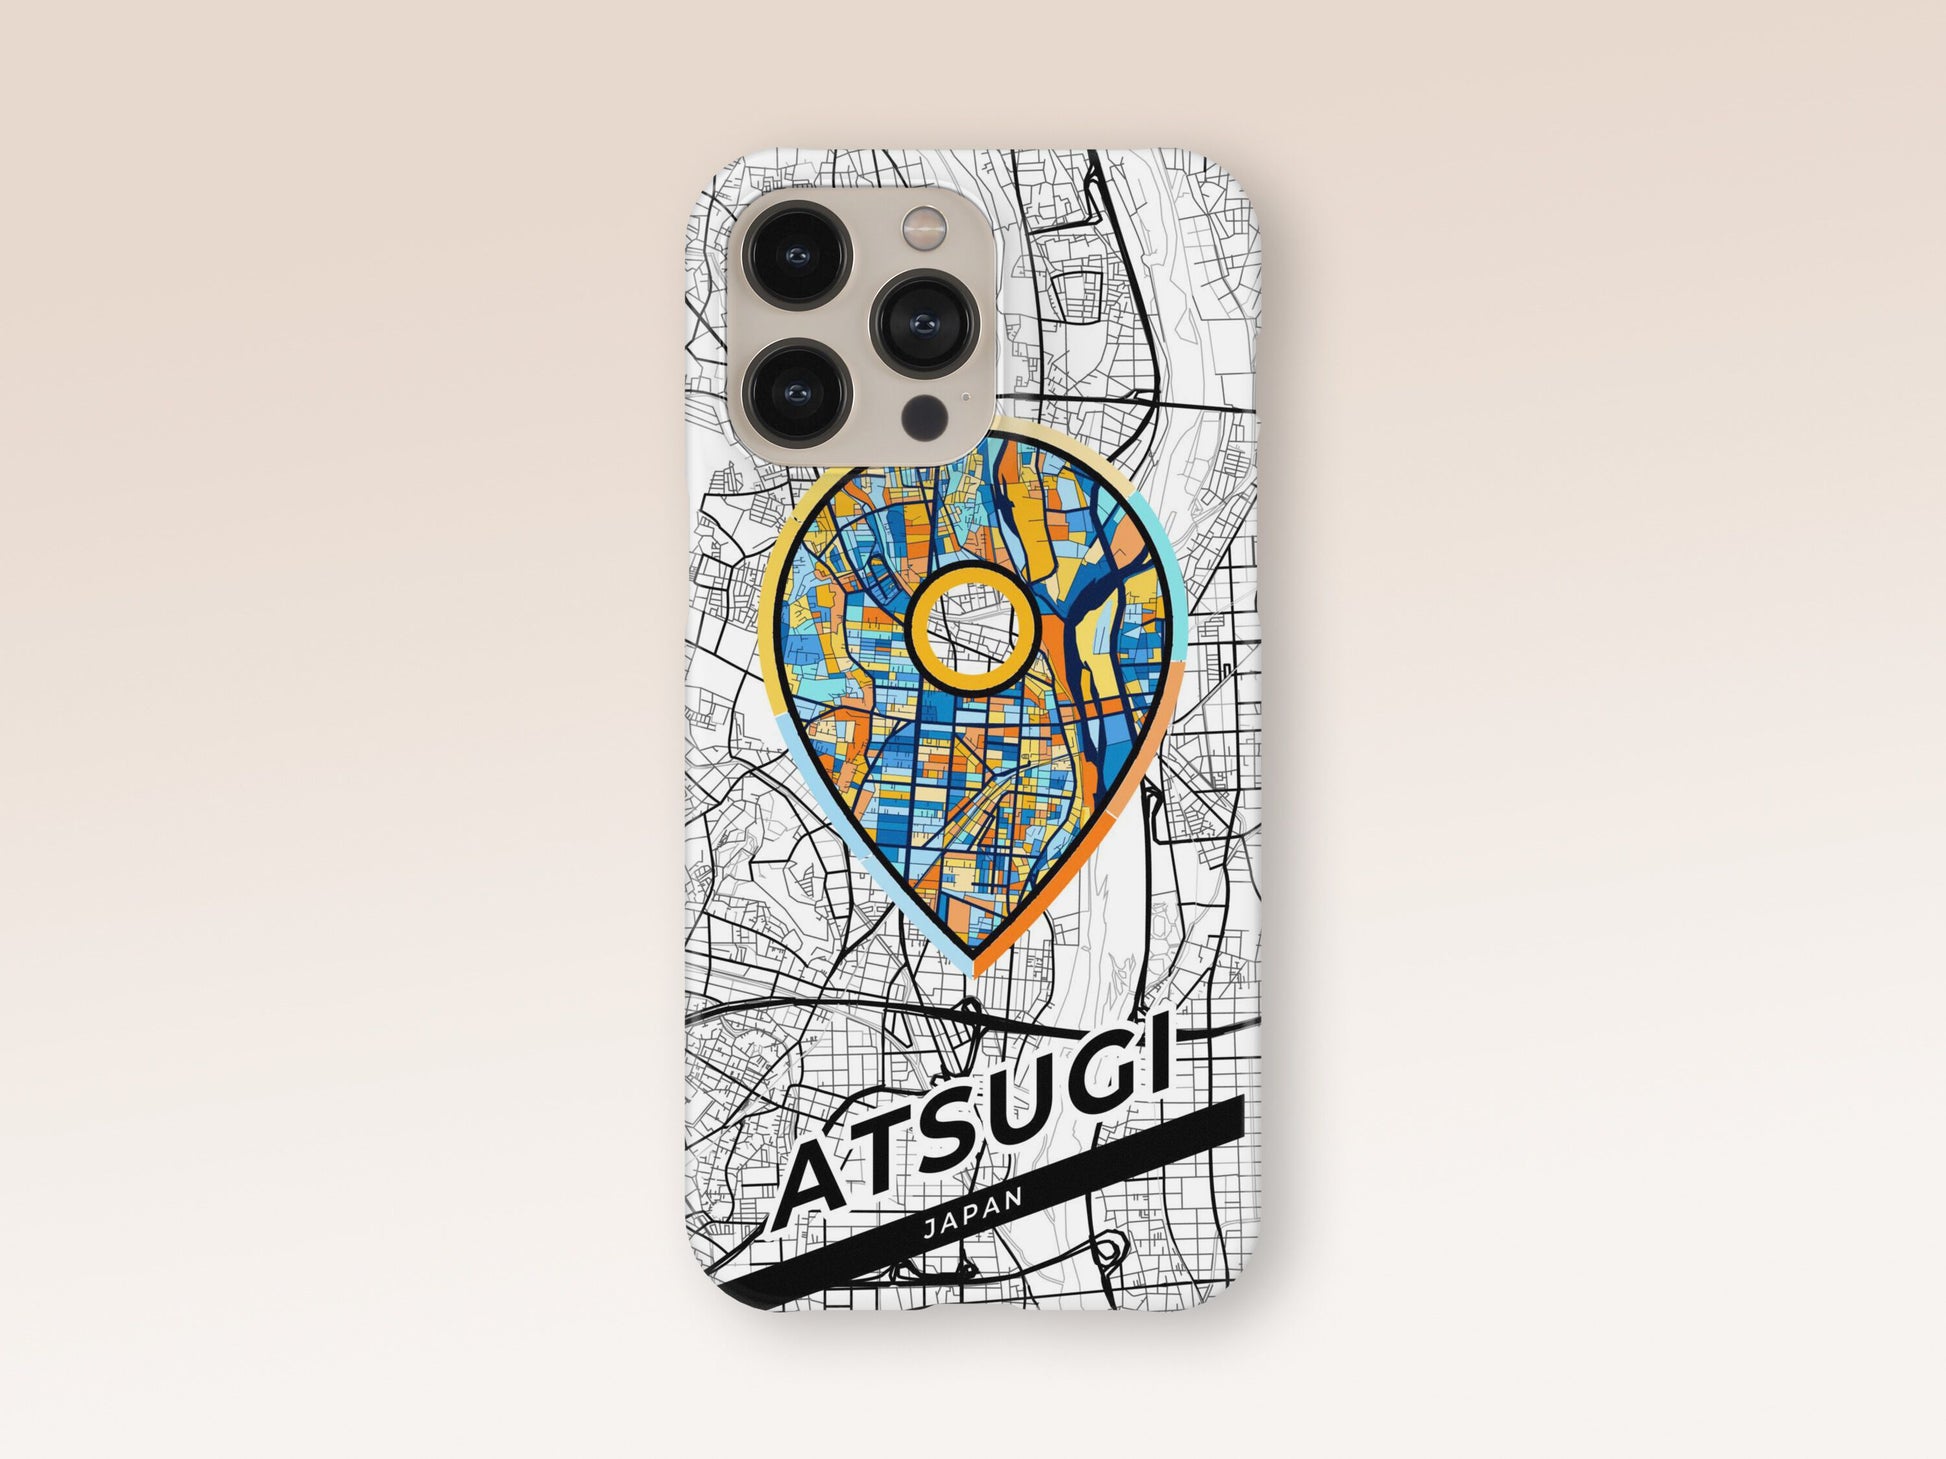 Atsugi Japan slim phone case with colorful icon. Birthday, wedding or housewarming gift. Couple match cases. 1